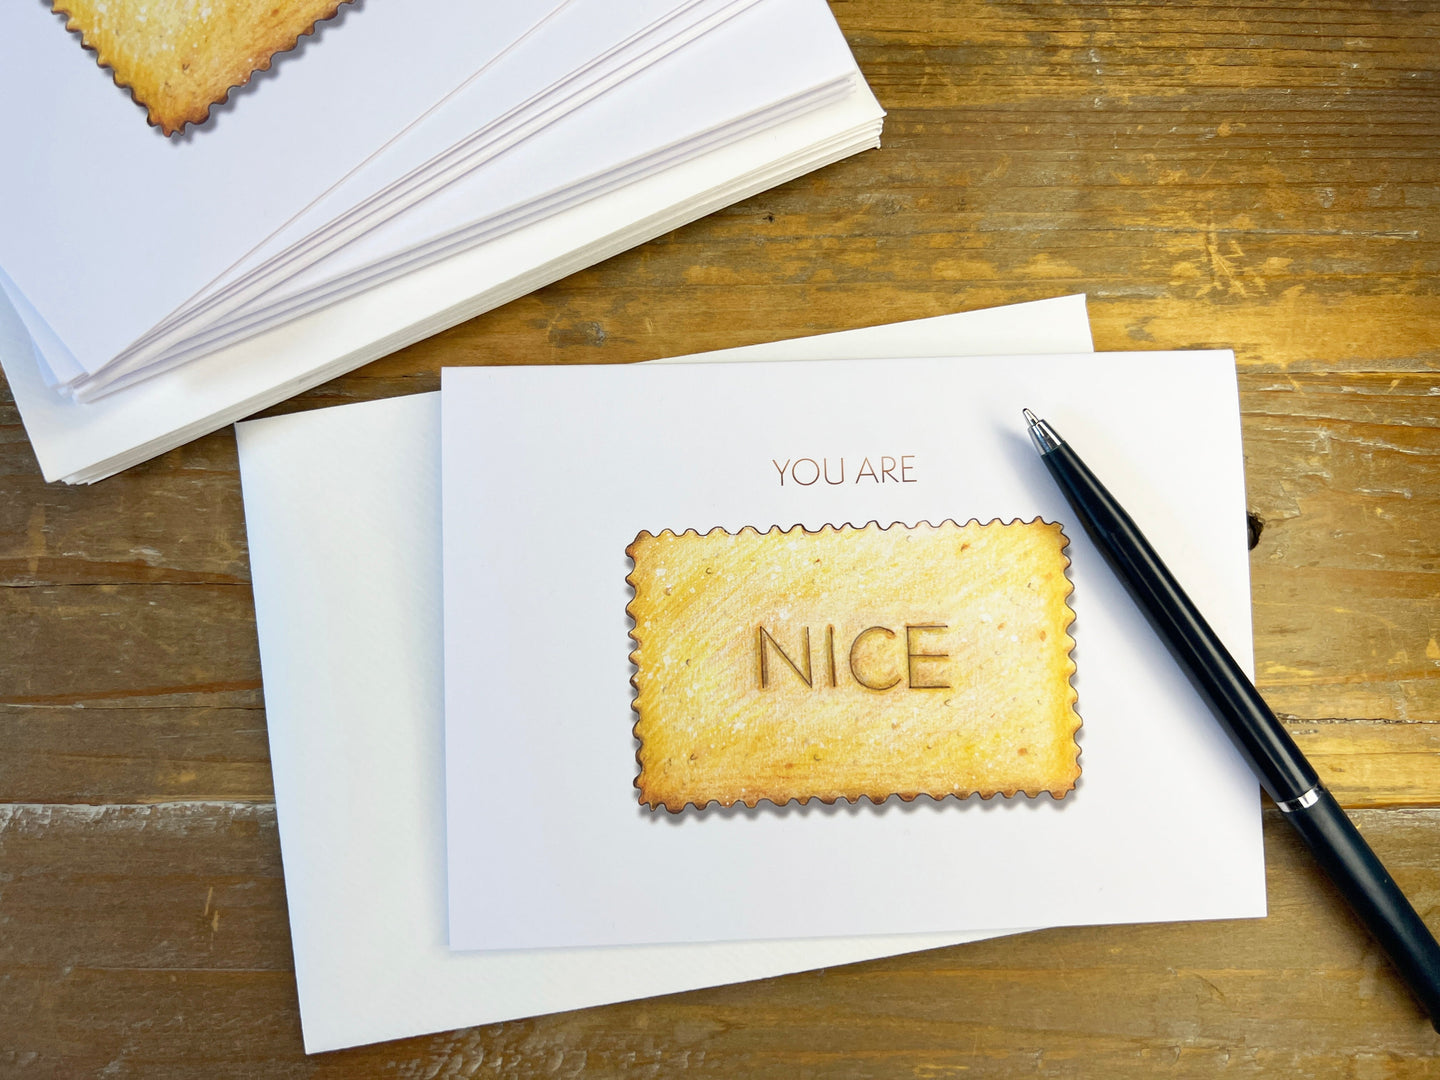 You are Nice Notelets - set of 10 Greeting & Note Cards Lucy Hughes Creations 